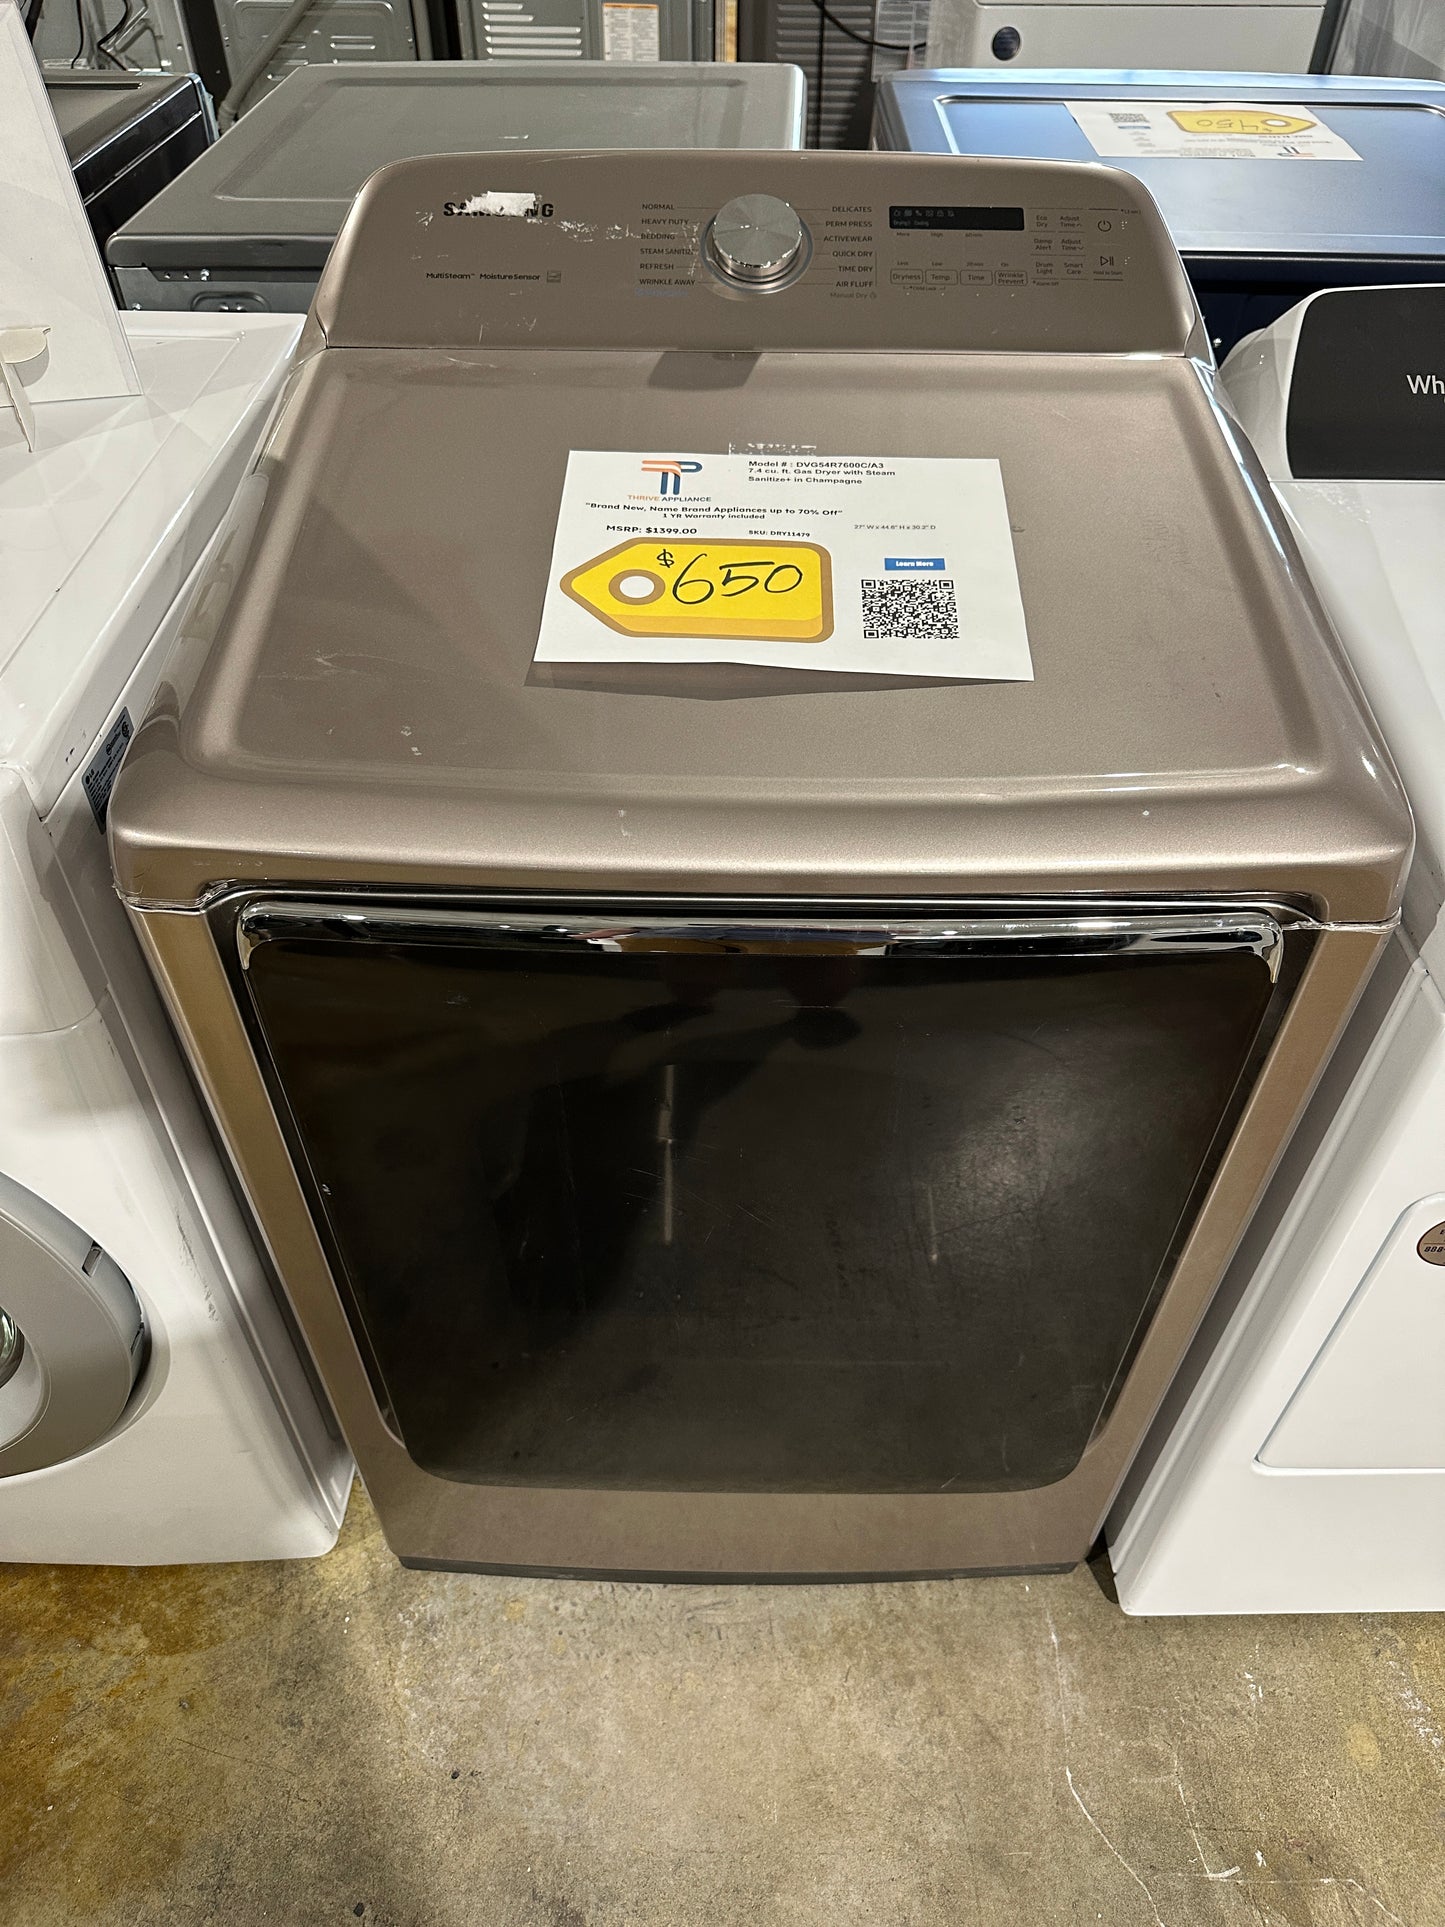 REDUCED PRICE NEW SAMSUNG ELECTRIC DRYER with STEAM and SENSOR DRY MODEL: DVG54R7600C  DRY11479S